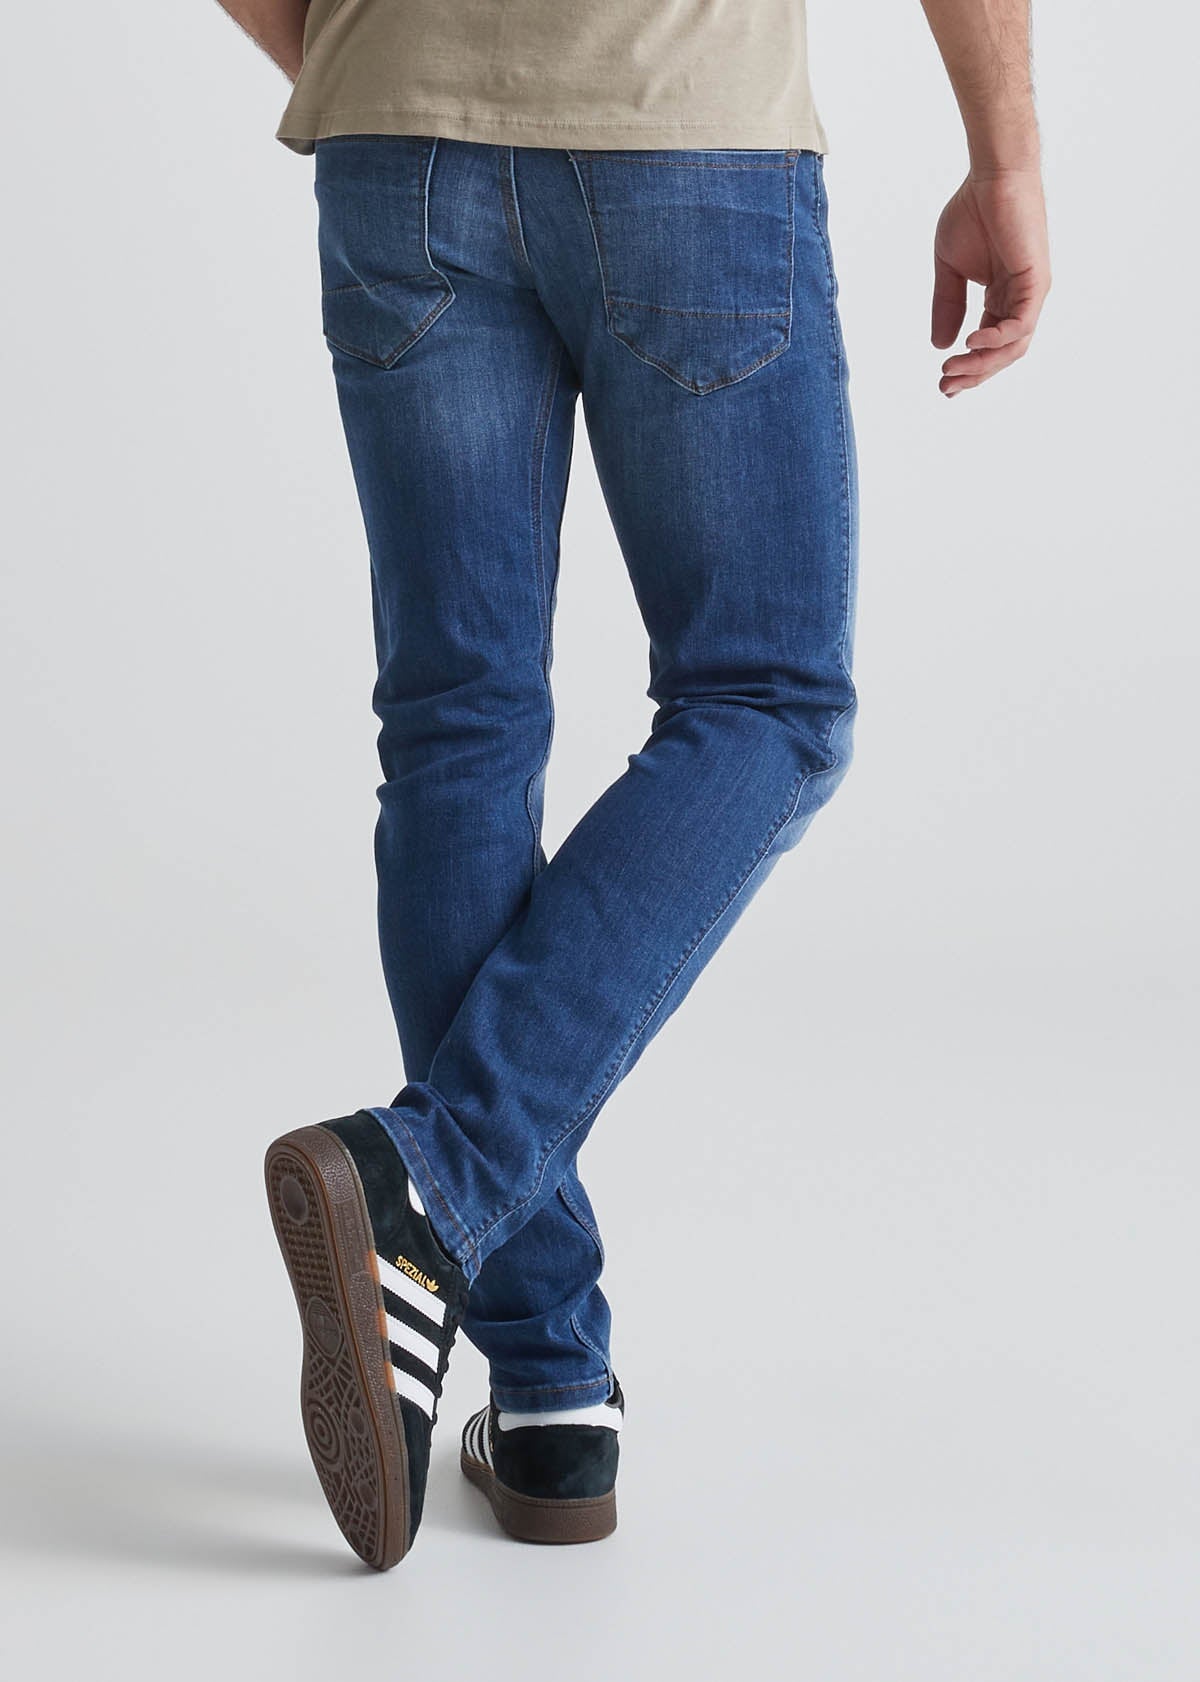 DUER Performance Denim Review: The Perfect Travel Jeans